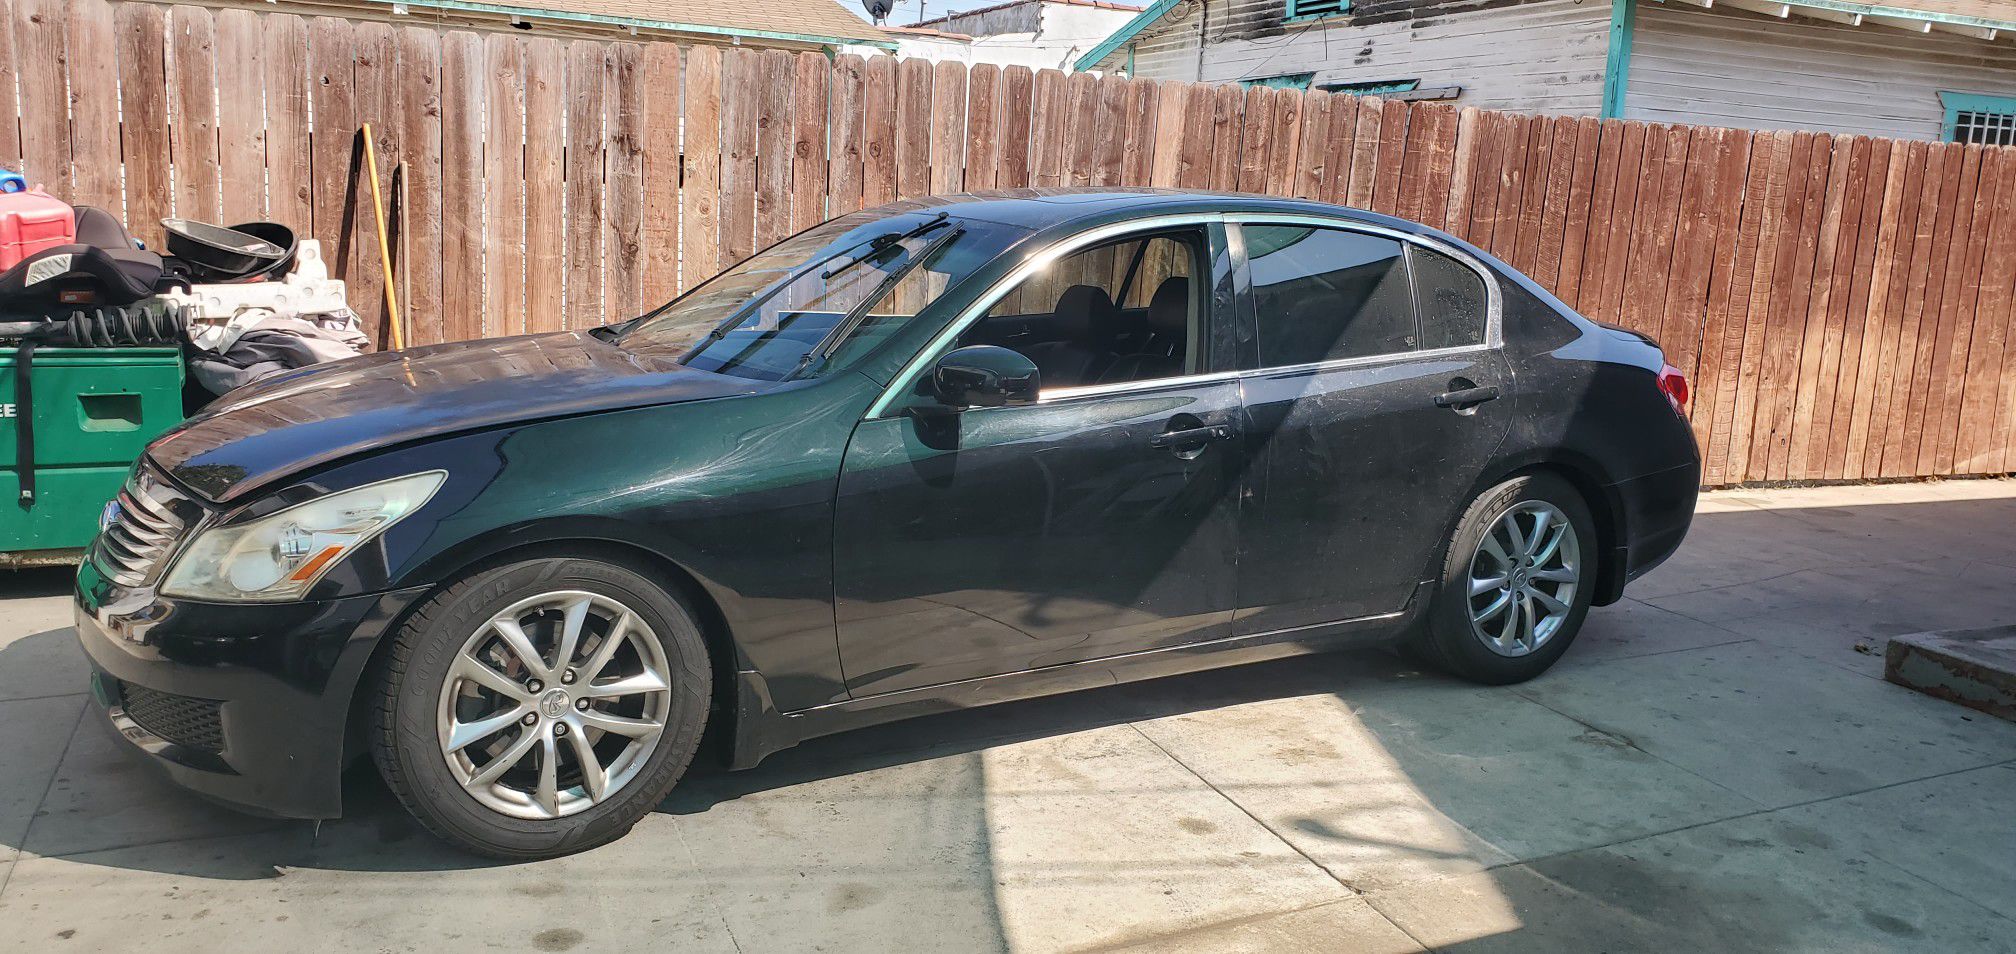 2008 Infiniti G35 (PART OUT) (NO CATS)